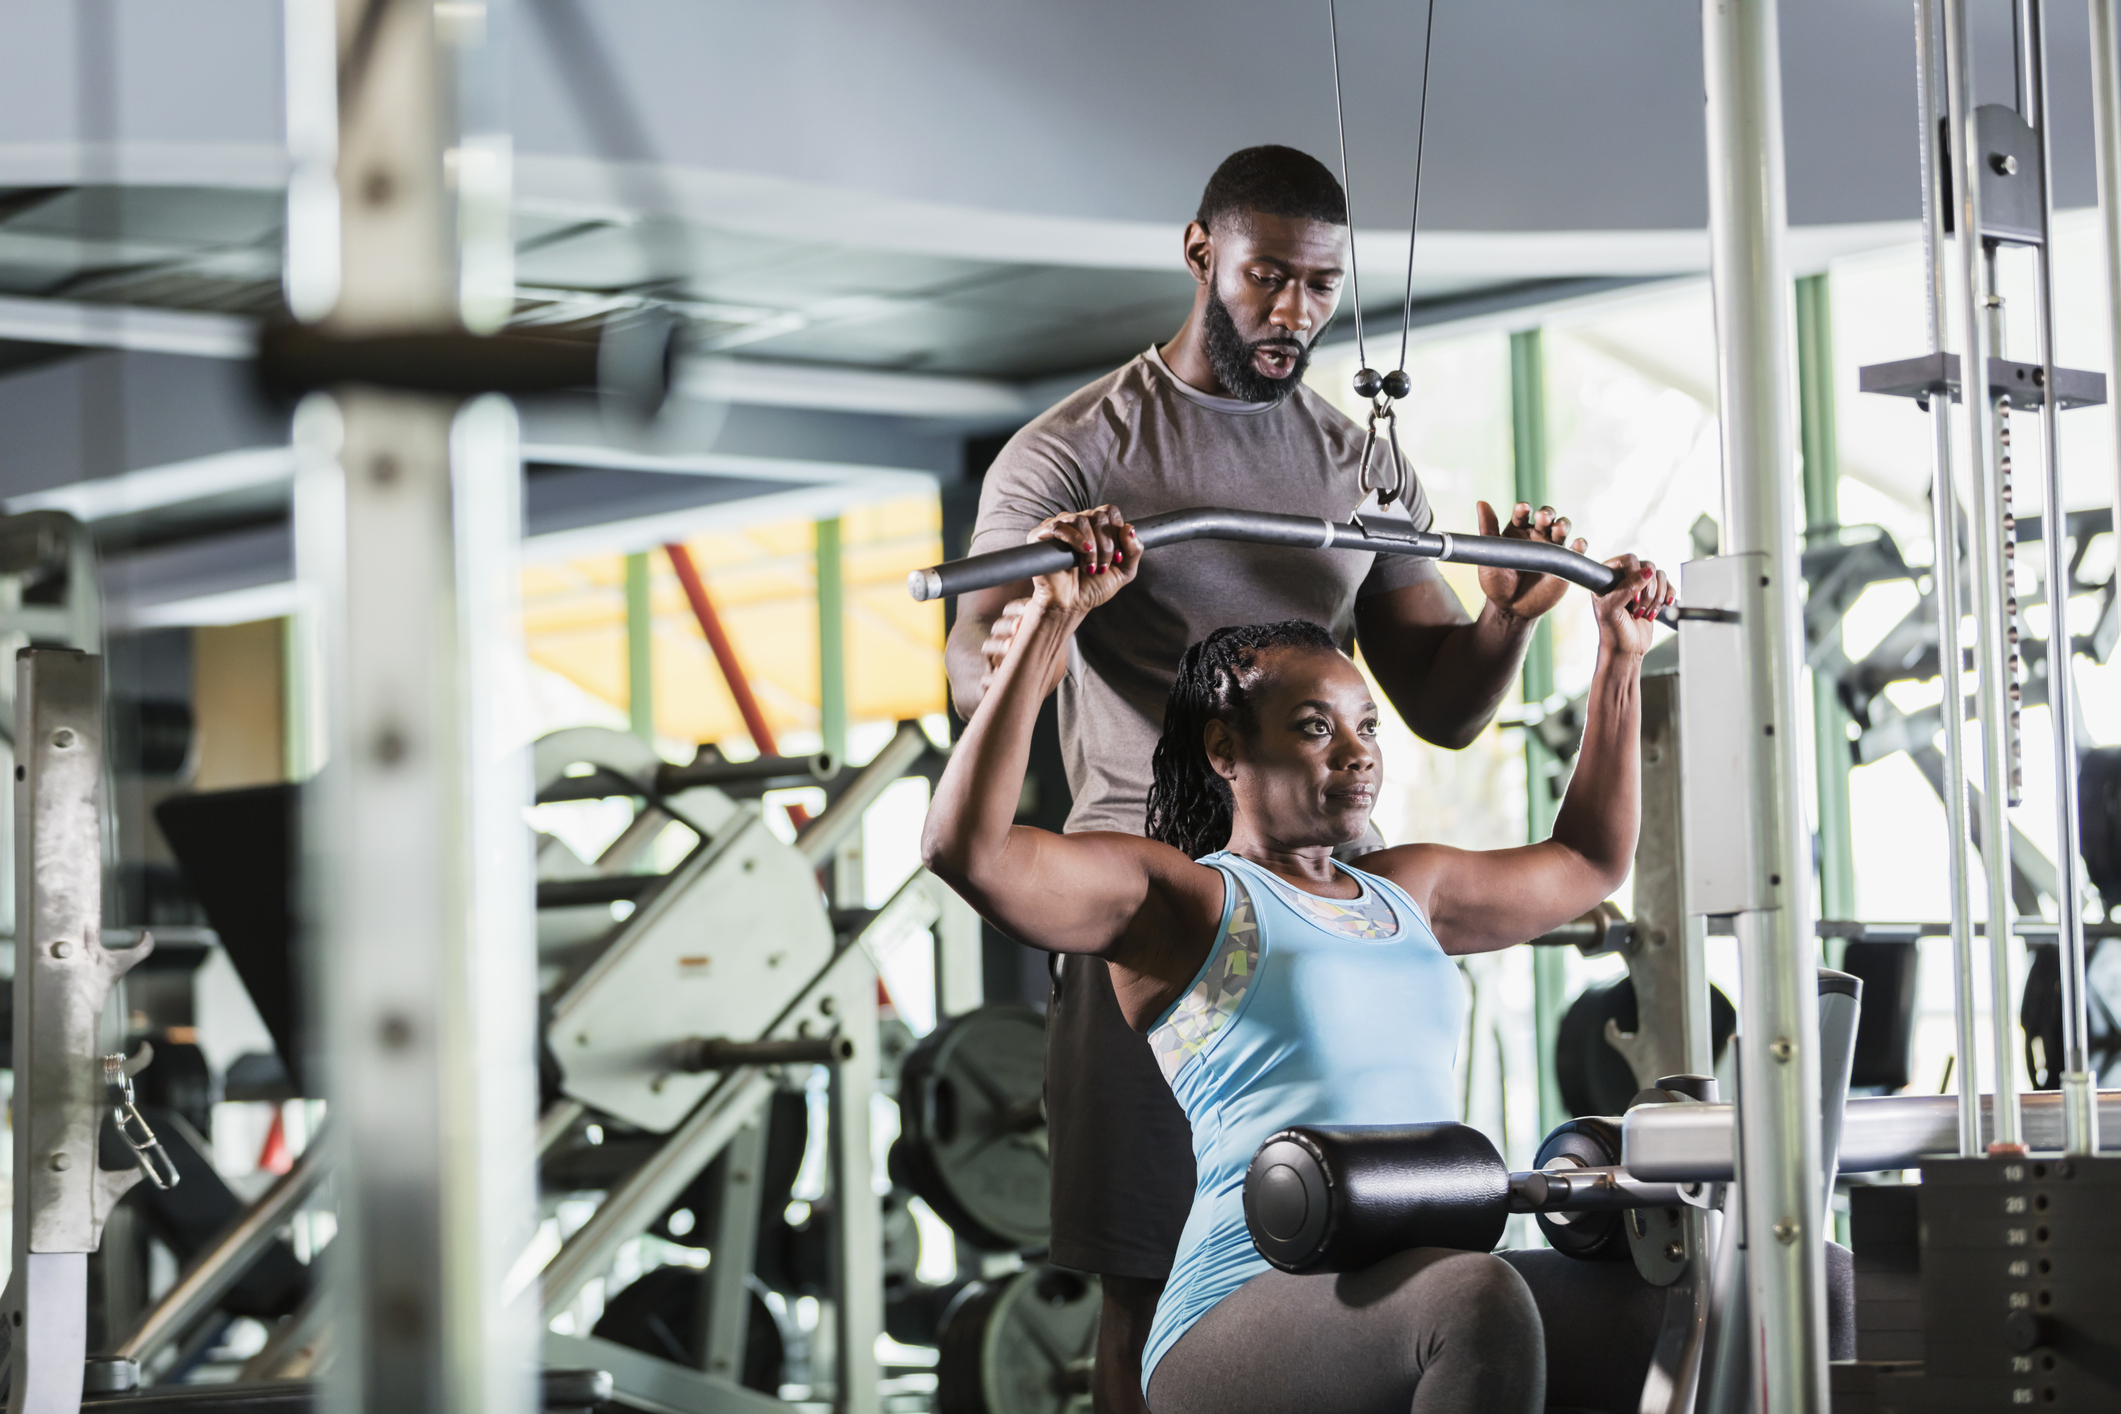 Finally Make a Move on Your Gym Crush With These 50 Gym Pick-up Lines